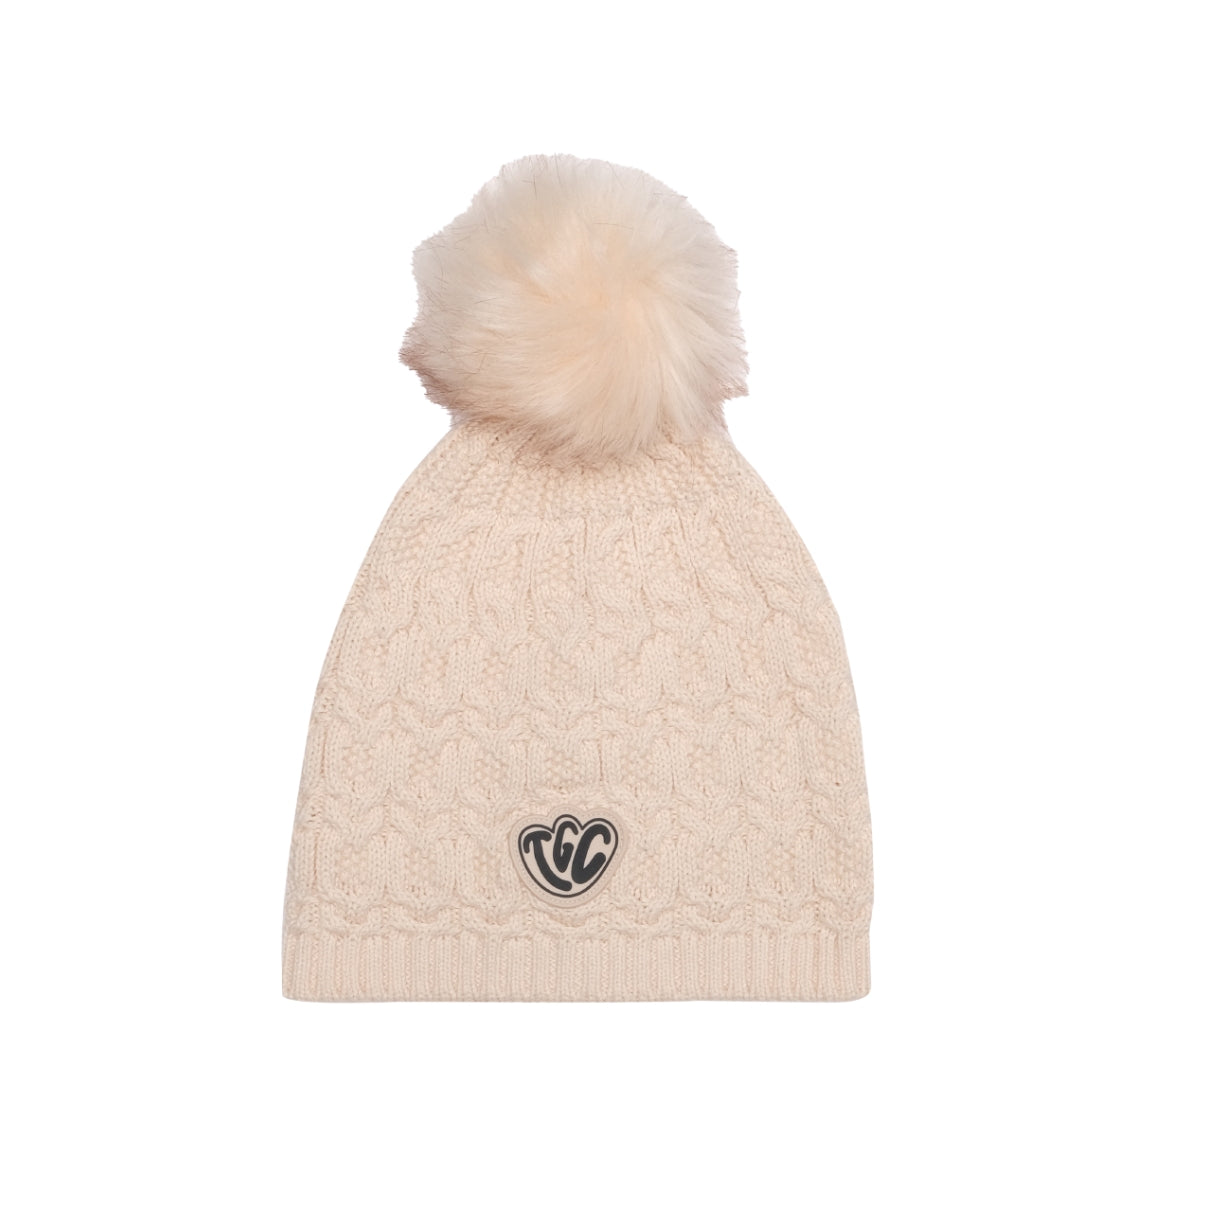 The Girl Club | The Collectibles Organic Lace Knit Beanie Cream